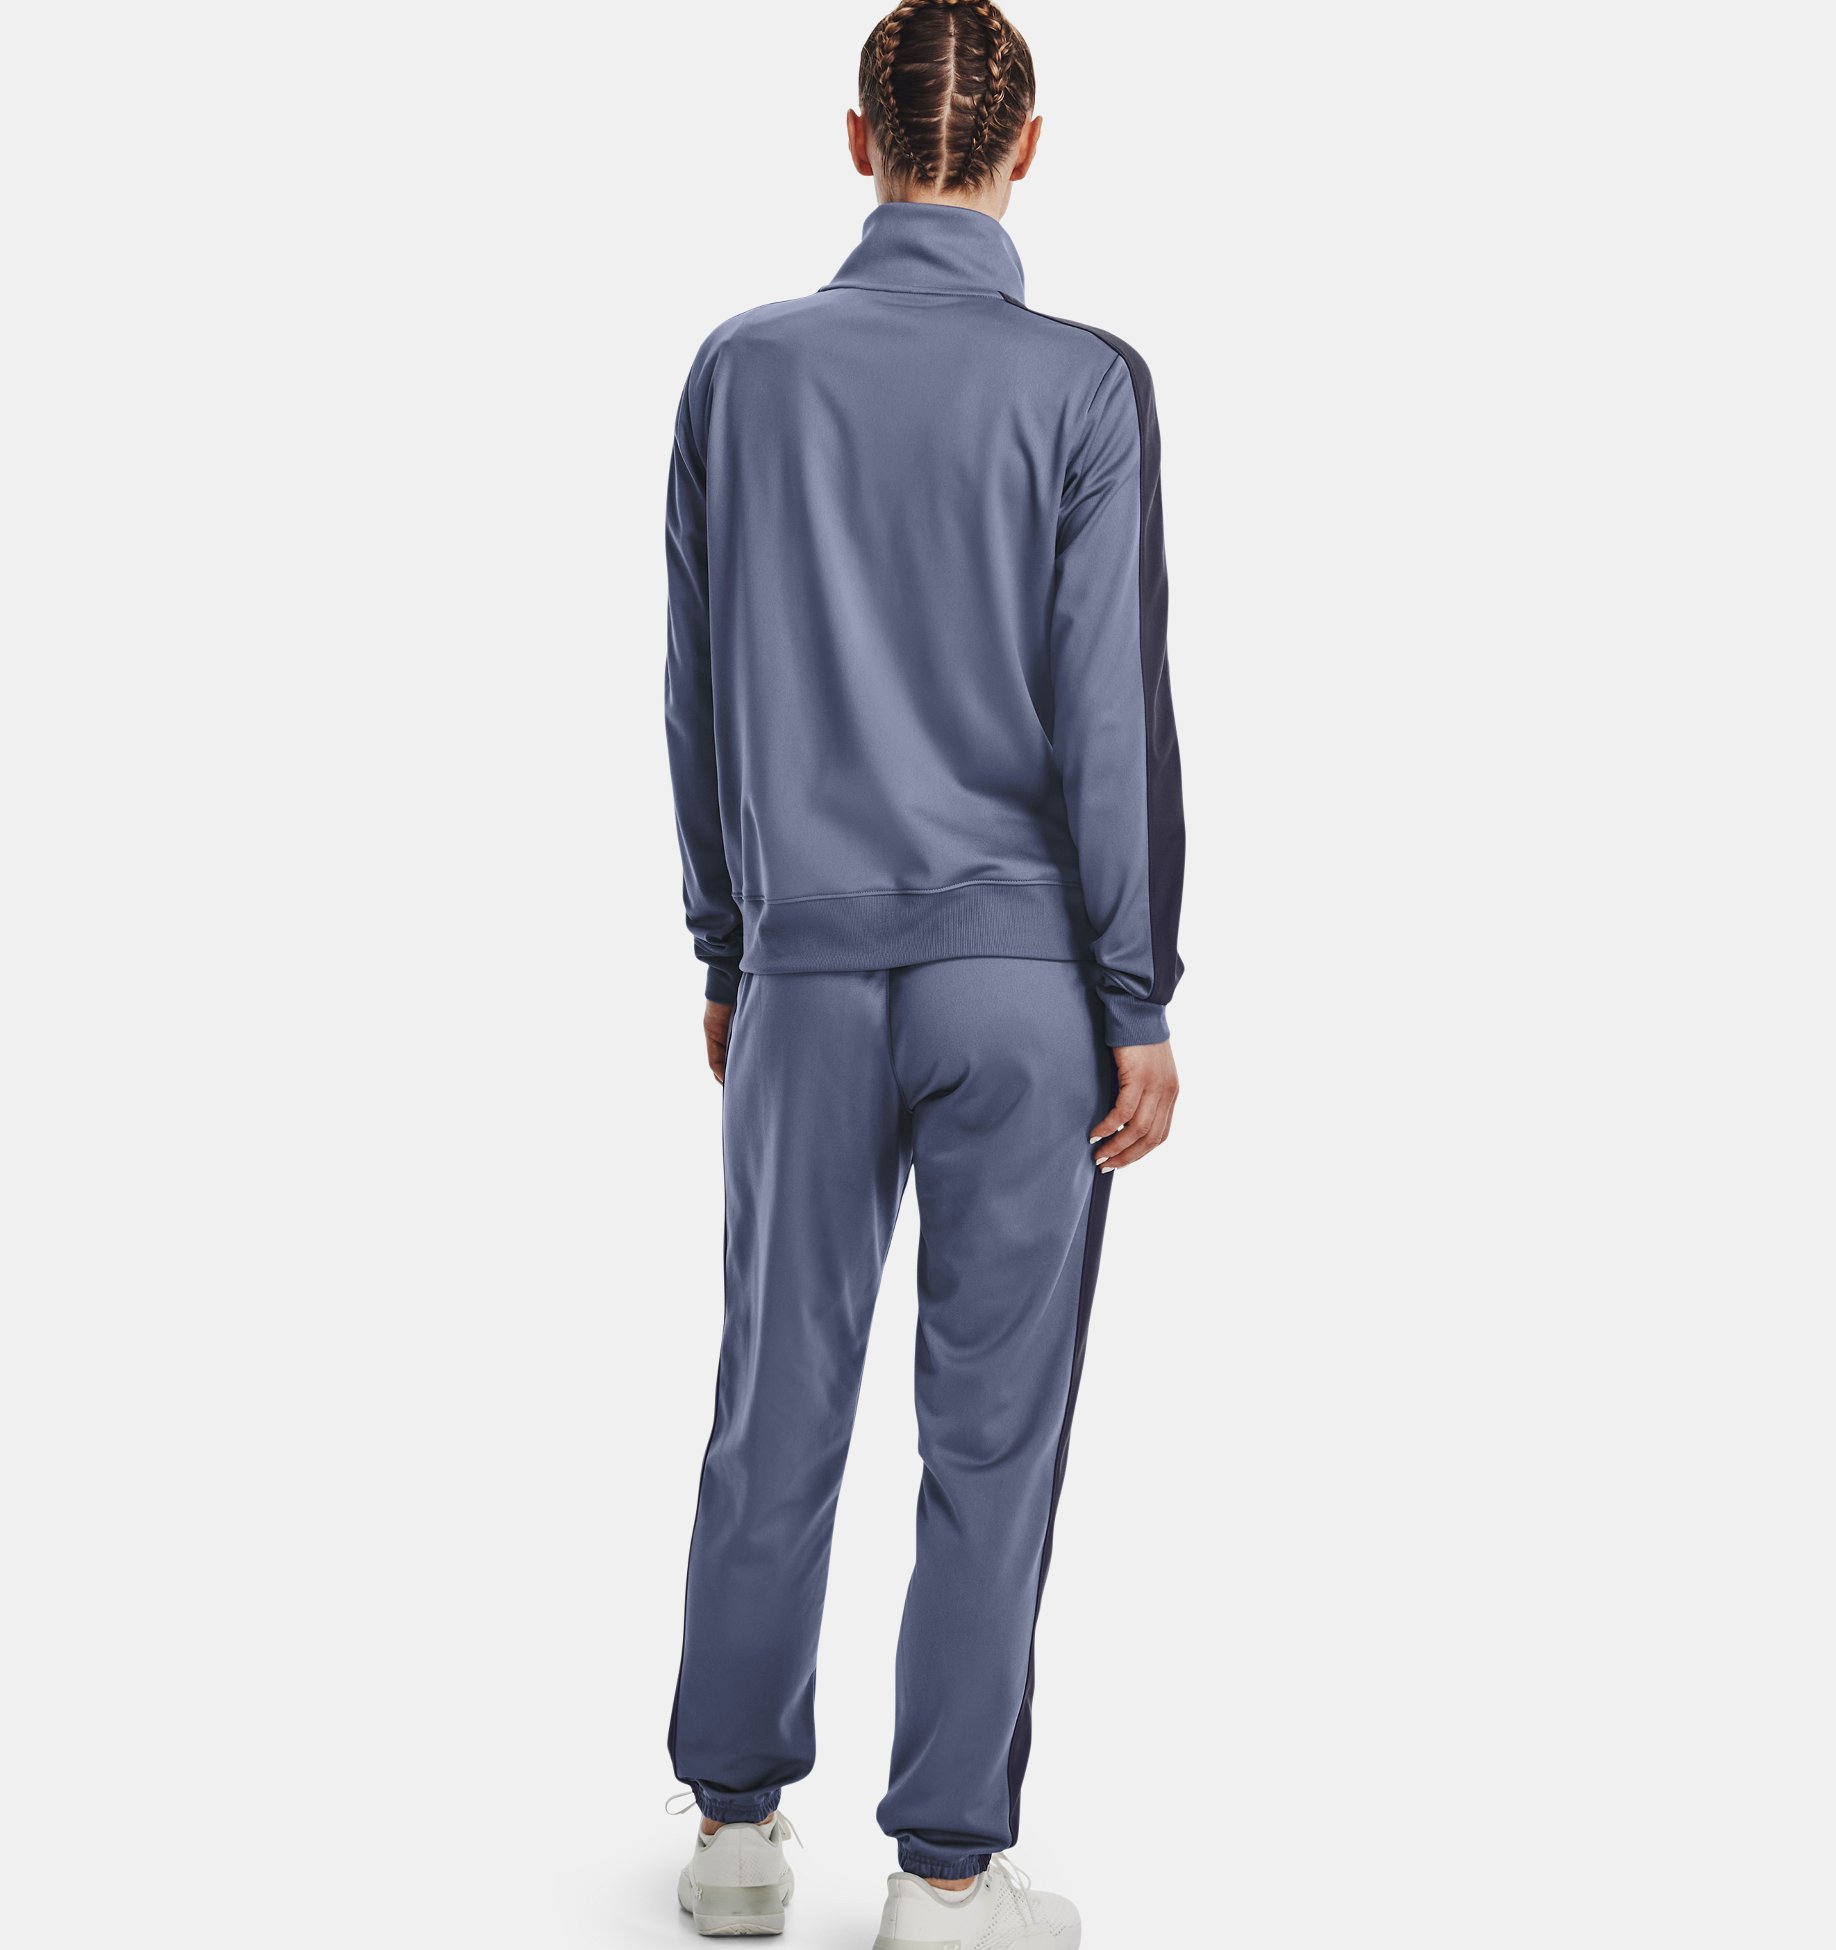 discount 85% Blue XL WOMEN FASHION Trousers Tracksuit and joggers Straight Reebok tracksuit and joggers 